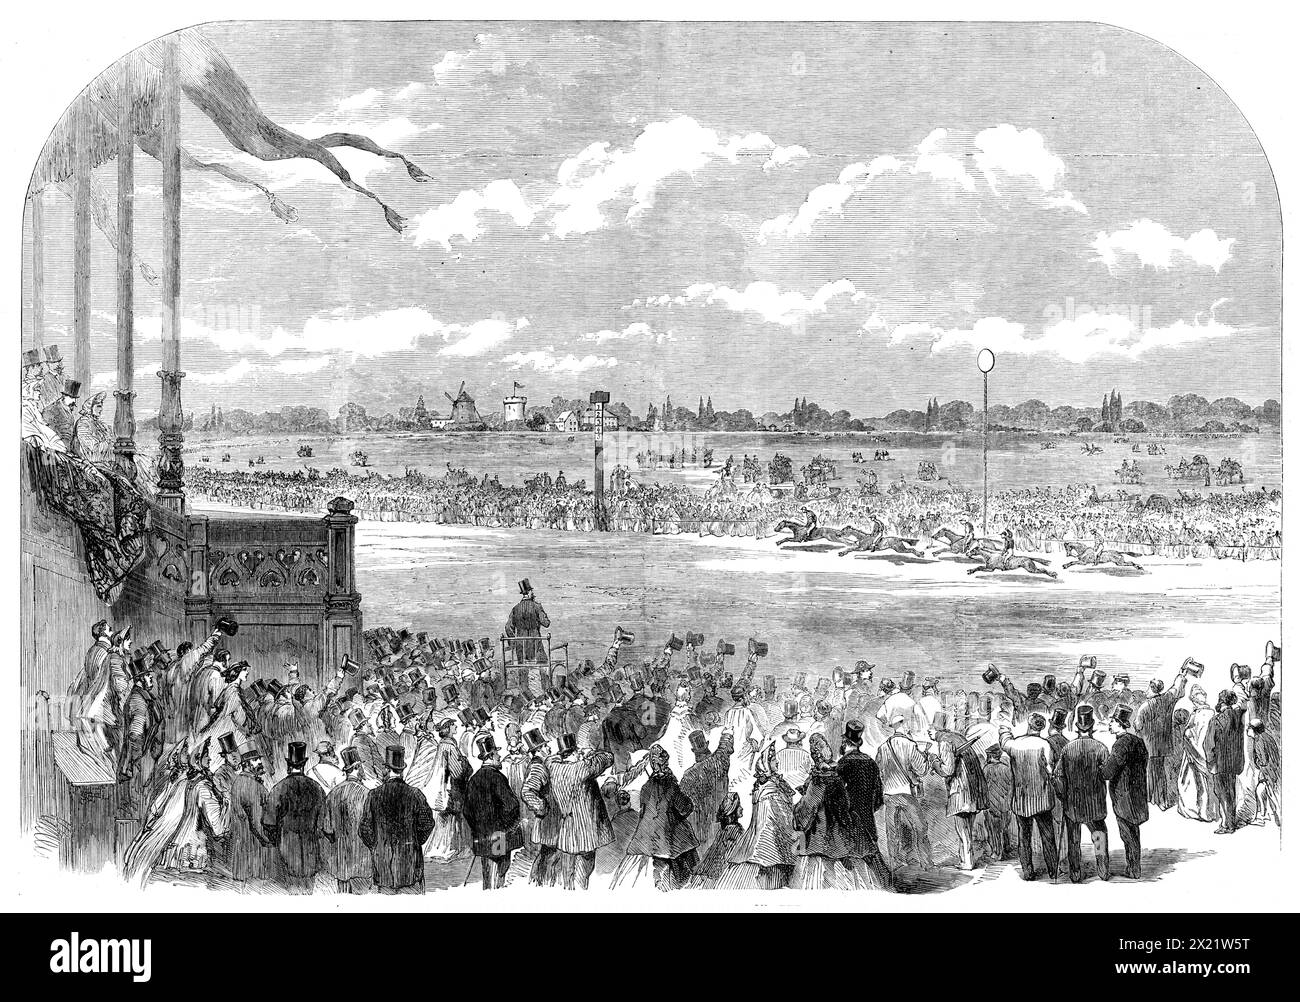 The Race for the Grand Prix de Paris, at Longchamps, on the 5th June, 1864. '...owing to the inferiority of the animals ultimately left on the card, the &quot;International&quot; was reduced to a match between England and France...It may be said without exaggeration that one hundred thousand &quot;elegant&quot; people were present at Longchamps; the arrival and departure of the brilliant equipages as they emerged from or drove towards the Bois de Boulogne was itself a most delightful sight...the general expectation was that Blair Athol would achieve an easy victory; and near the finish, when C Stock Photo